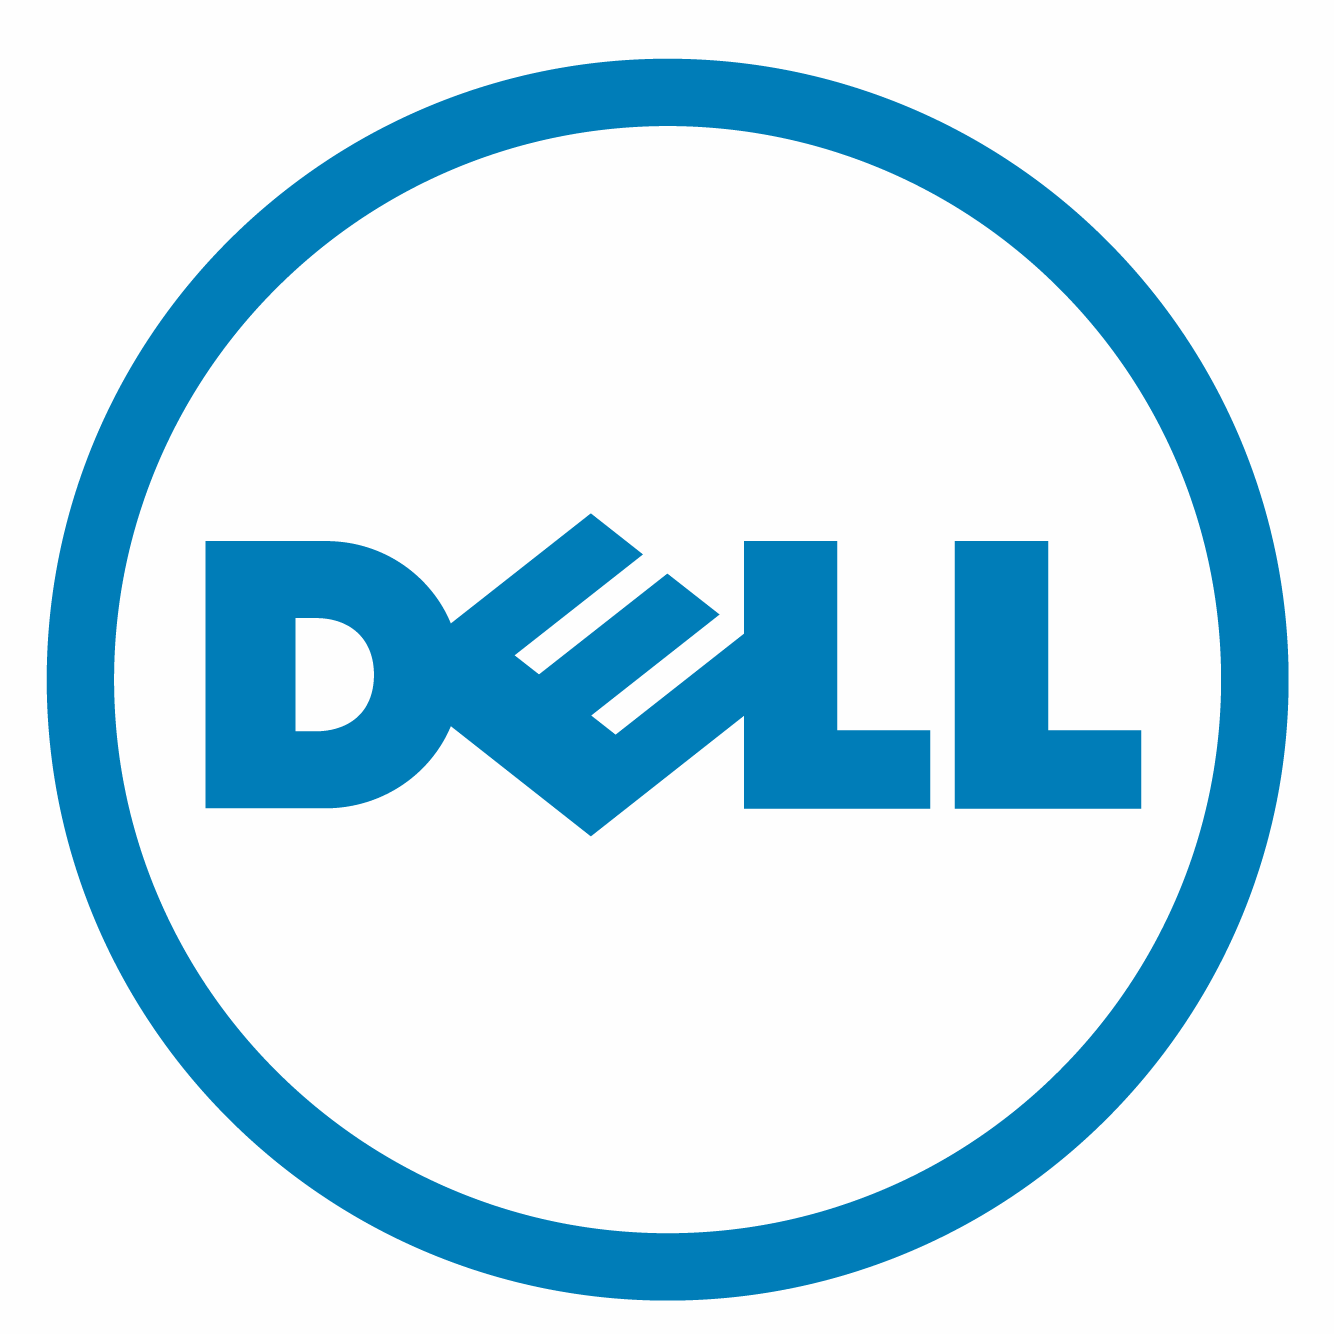 https://securetech.ae/wp-content/uploads/2019/02/01.DELL_.png